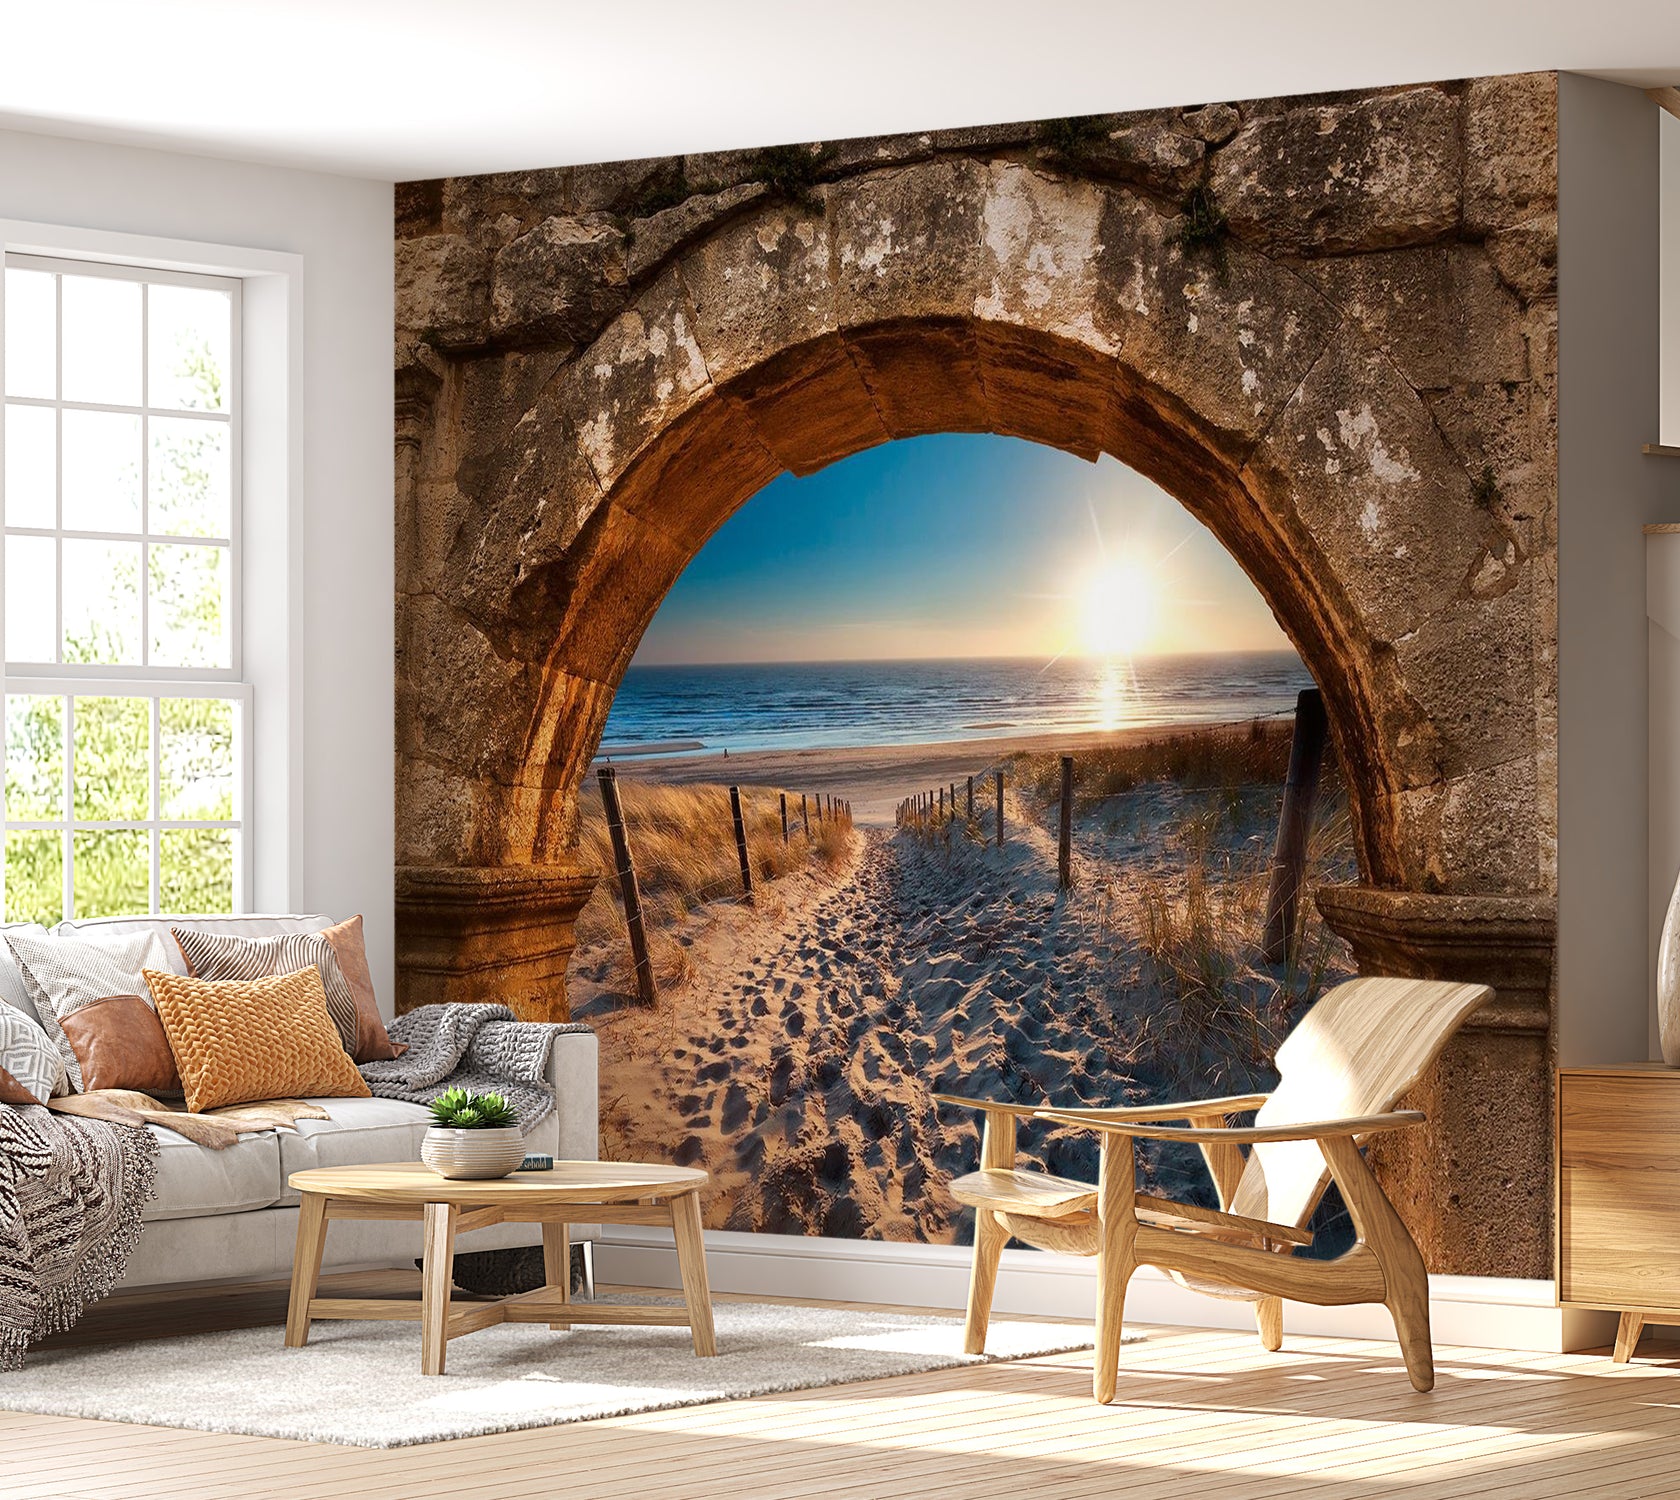 Peel & Stick Beach Wall Mural - Arch And Beach - Removable Wall Decals